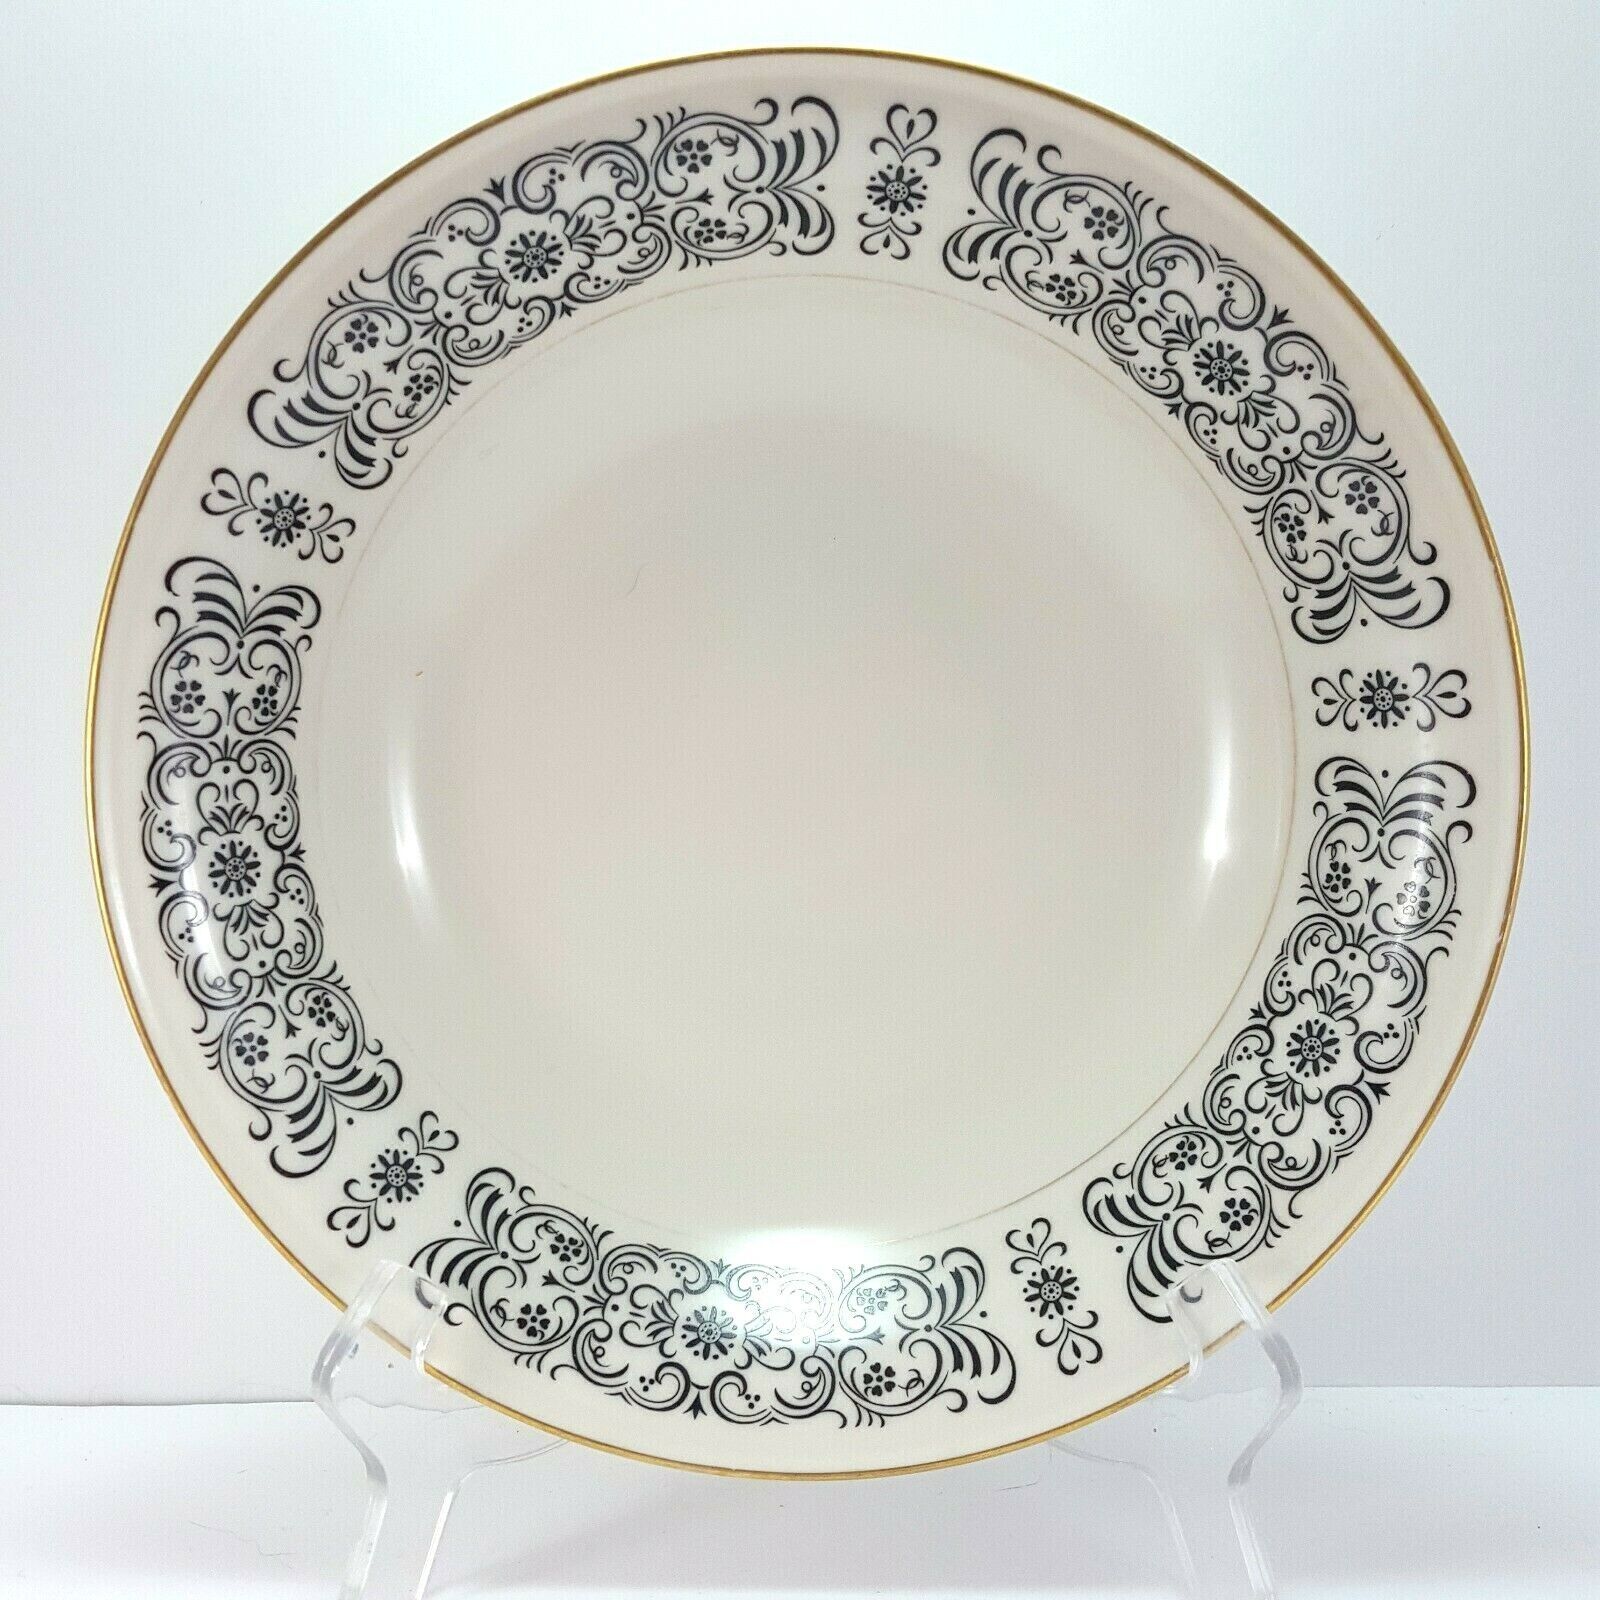 Primary image for Mikasa Riviera 205 Round Vegetable Serving Bowl 9.63in Ivory Black Scrolls